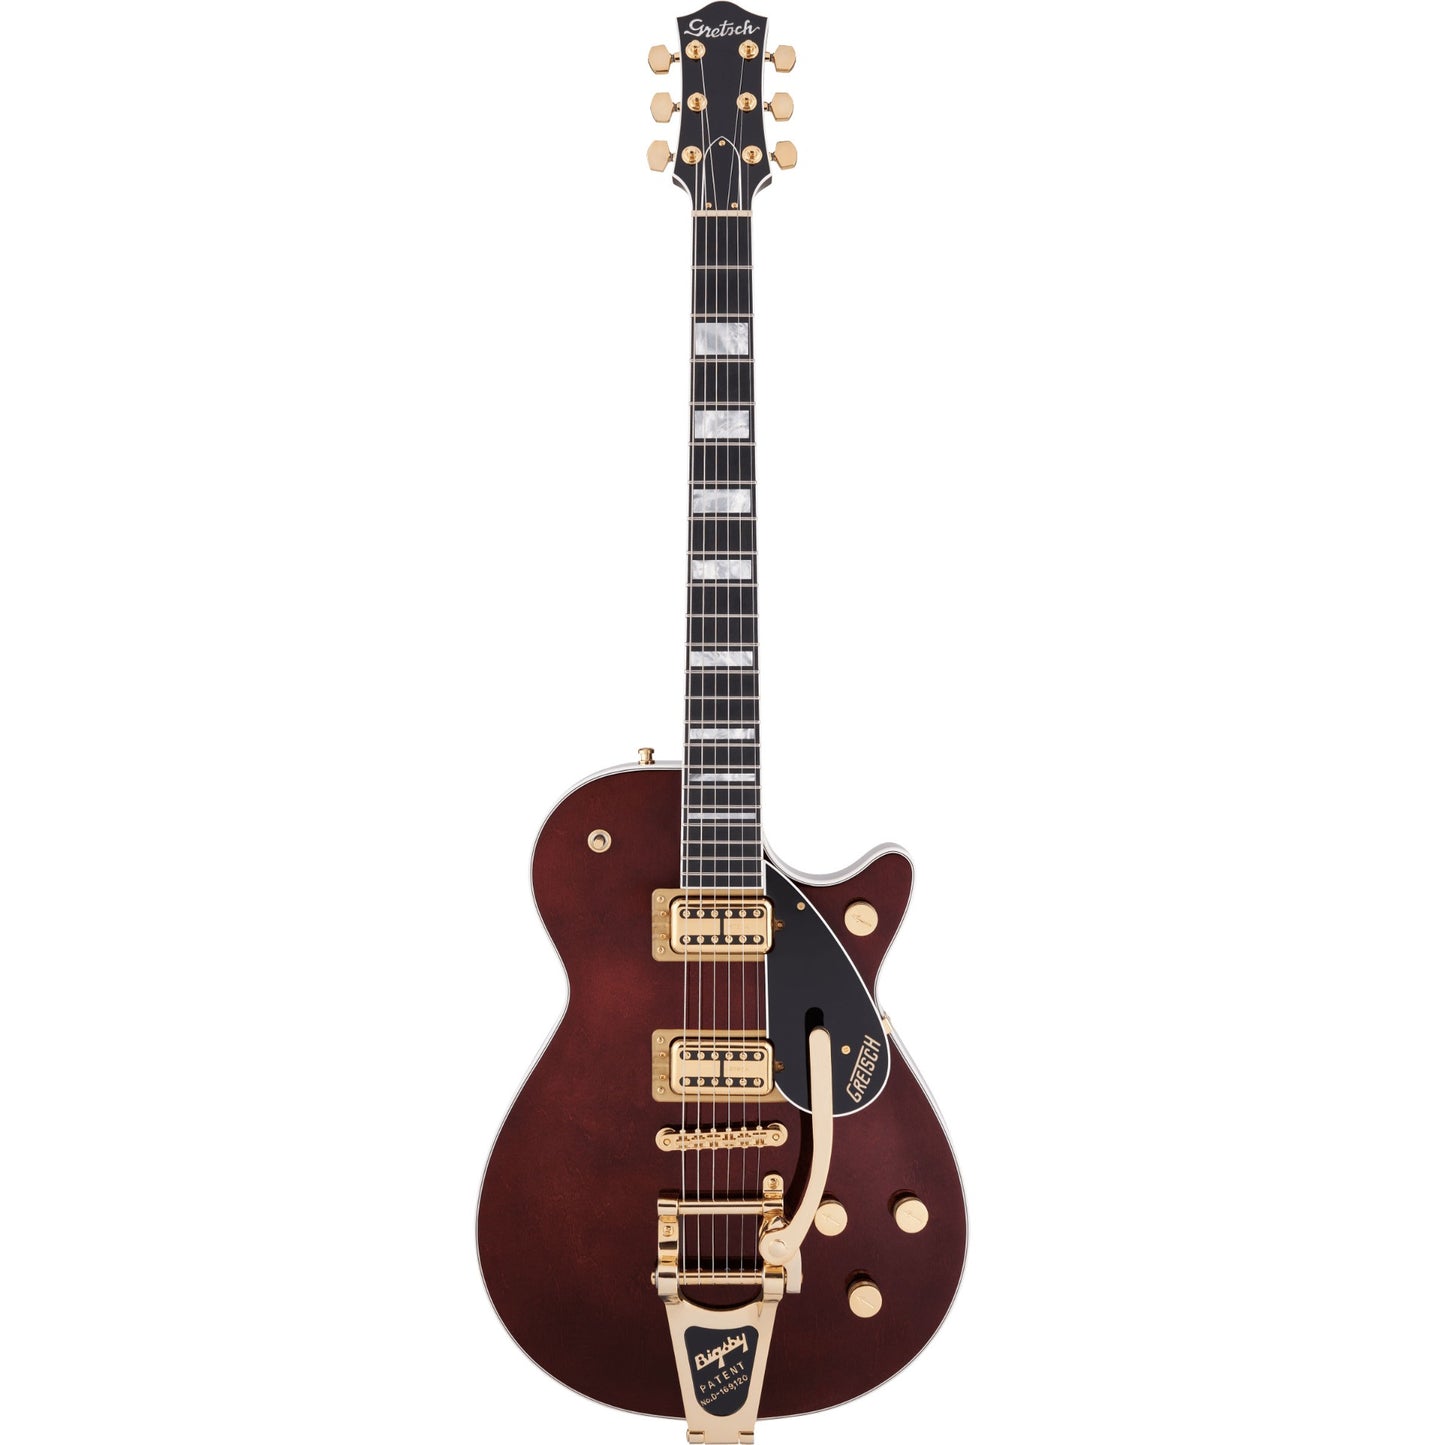 Gretsch G6228TG-PE Players Edition Jet BT with Bigsby in Walnut Stain